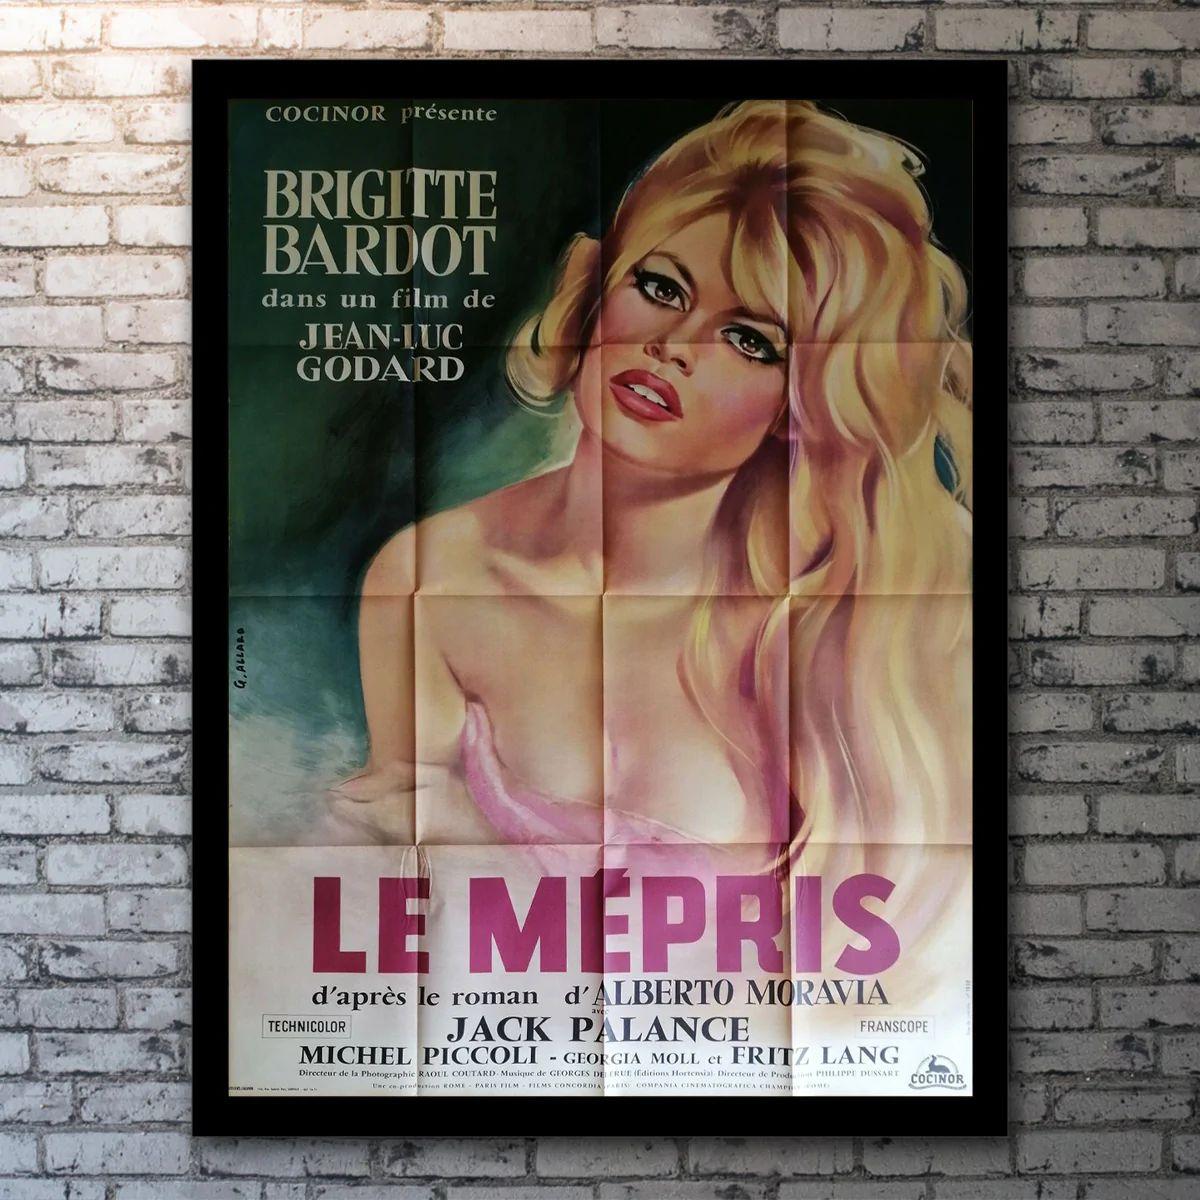 Le Mepris, Unframed Poster, 1963

This original French 47 x 63' Grande is one of Bardot's most asked for country-of-origin posters. Featuring a stunning illustration of Brigitte Bardot by artist Gilbert Allard, this masterpiece shows Bardot at the